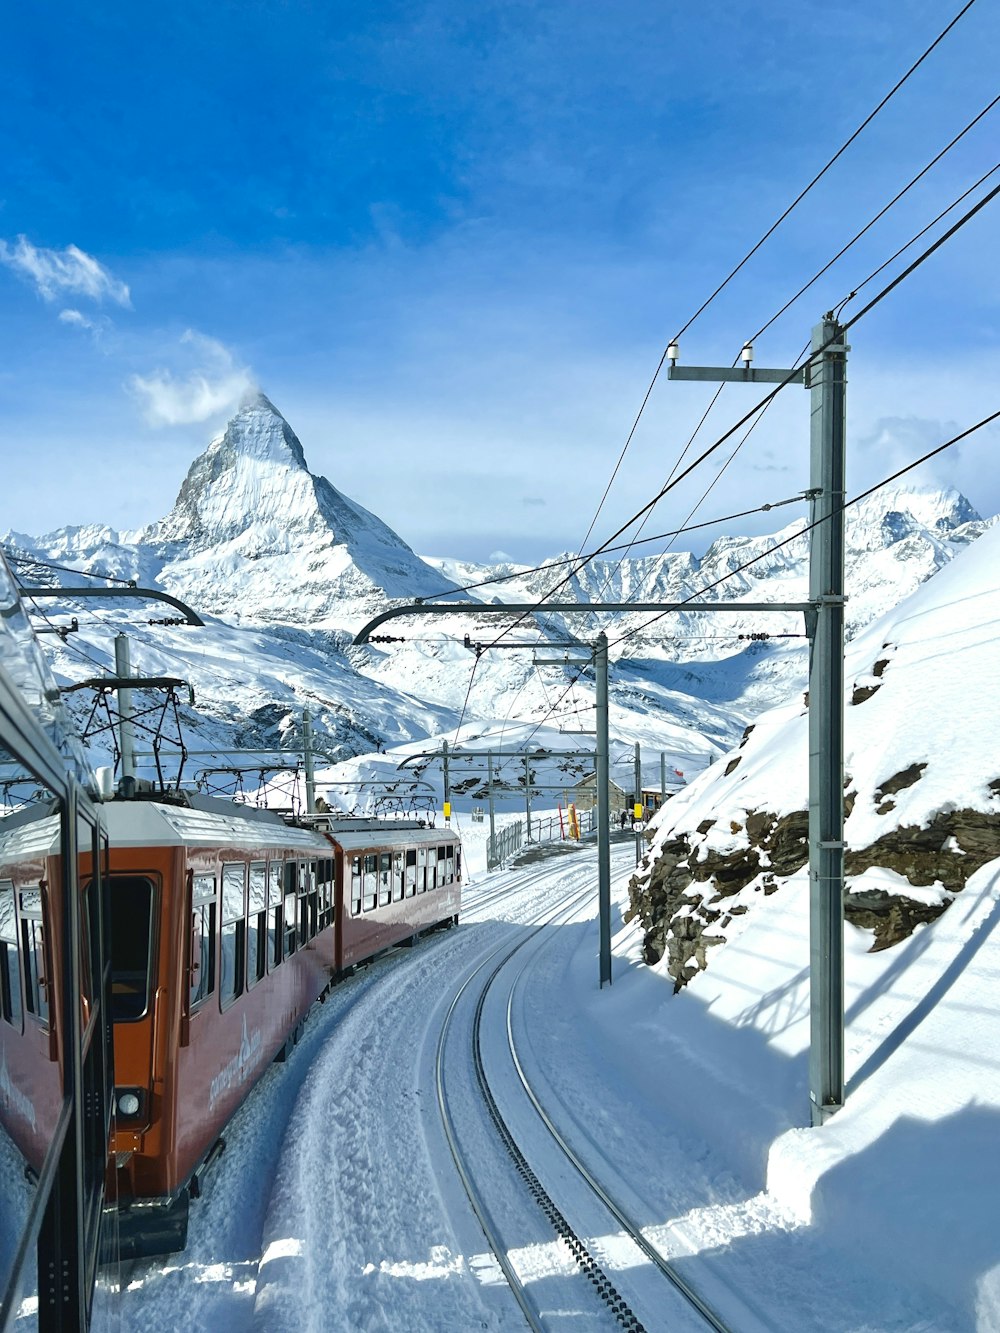 a red train traveling down tracks next to a snow covered mountain